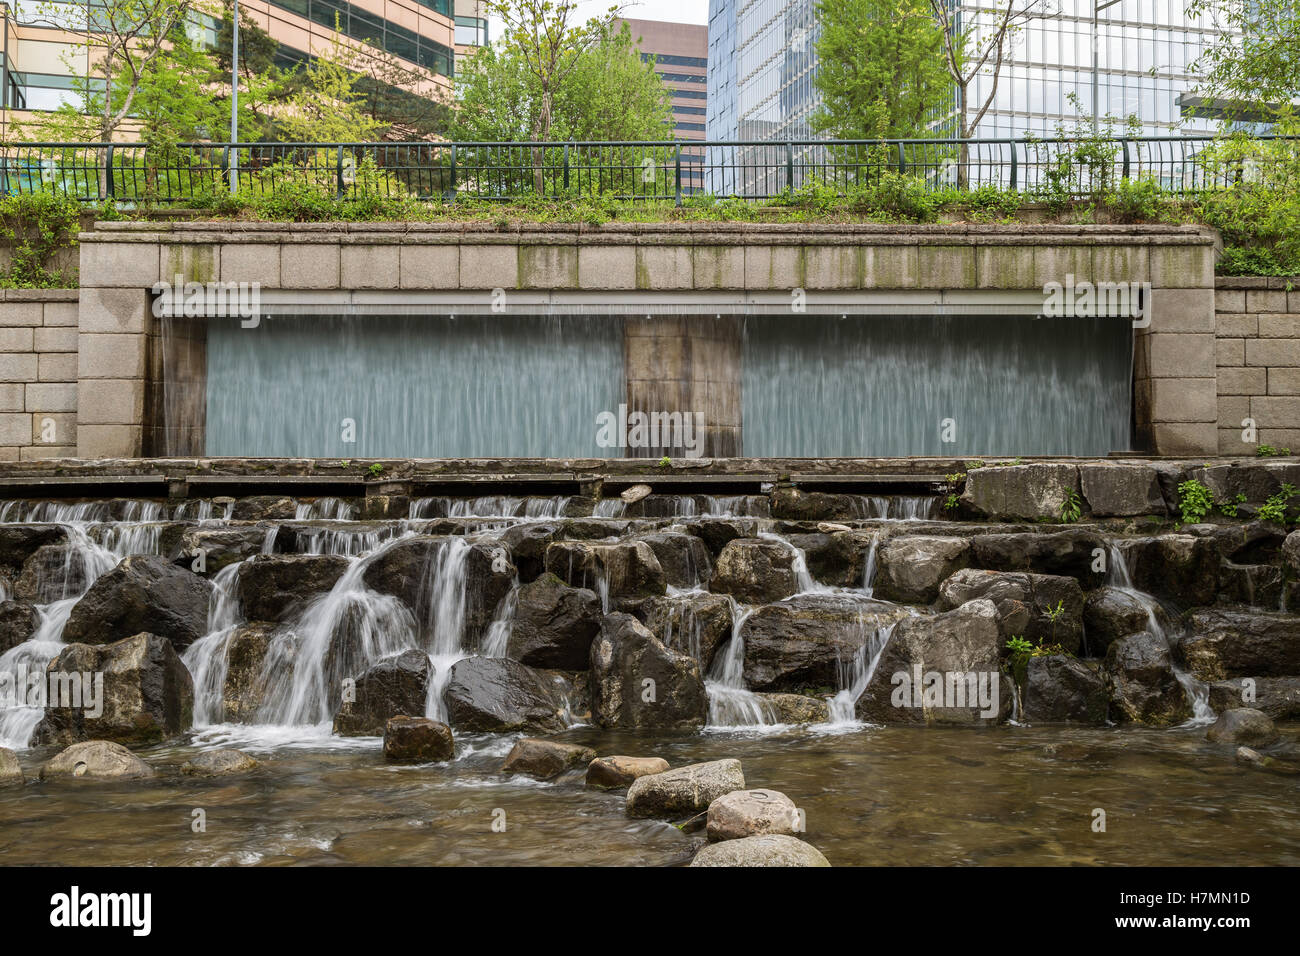 Artificial waterfall along the Cheonggyecheon Stream in Seoul, South Korea, viewed from the front. Stock Photo